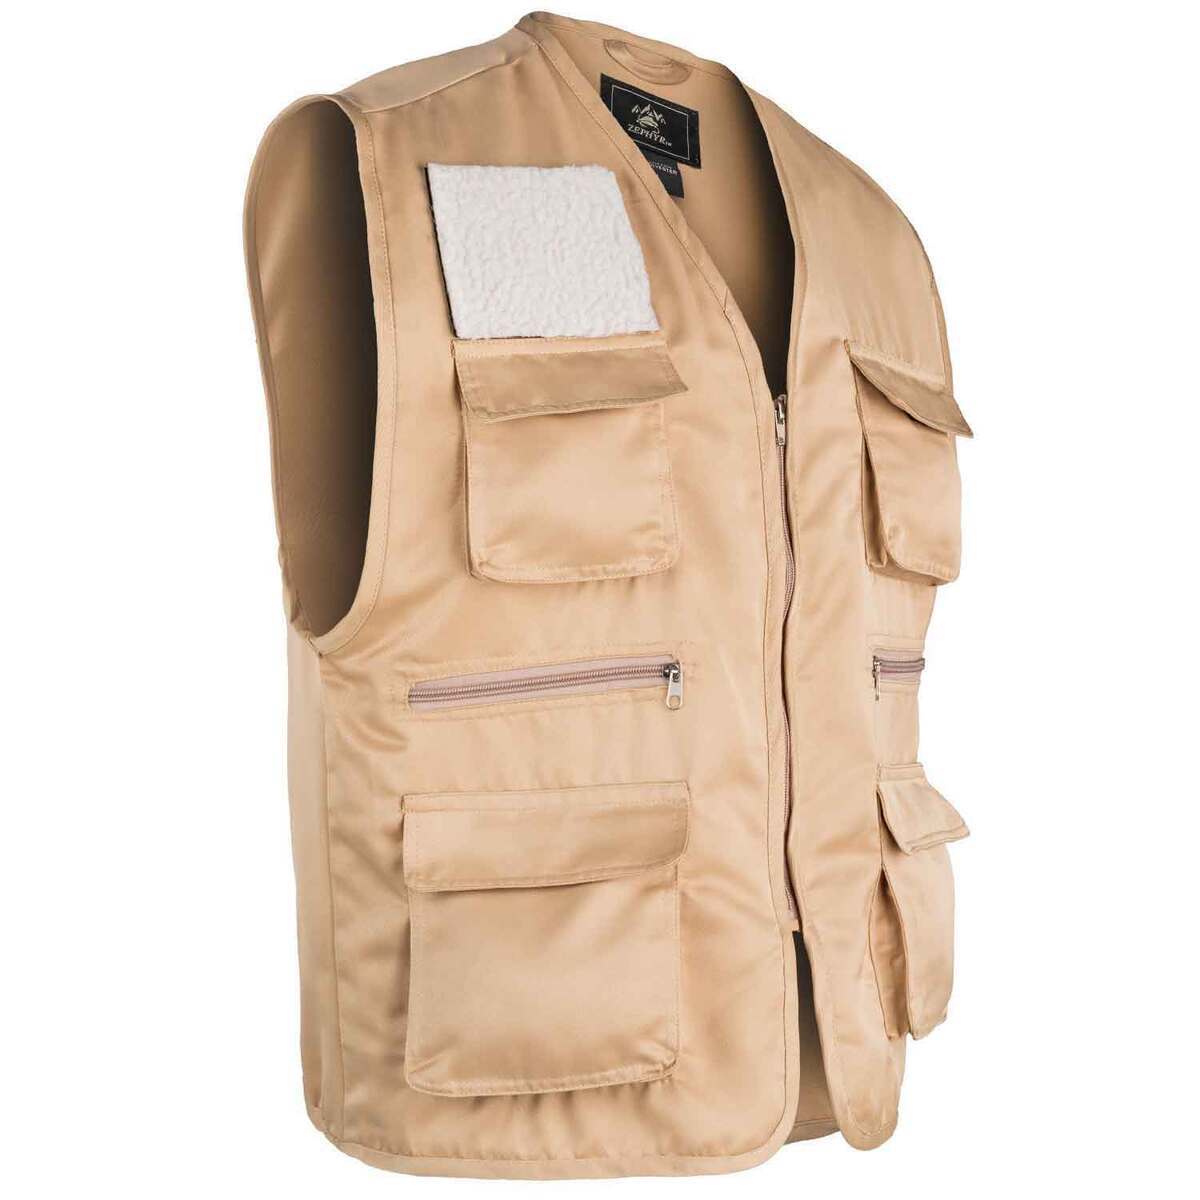 Best Fly Fishing Vest In 2023 - Top 10 Fly Fishing Vests Review 